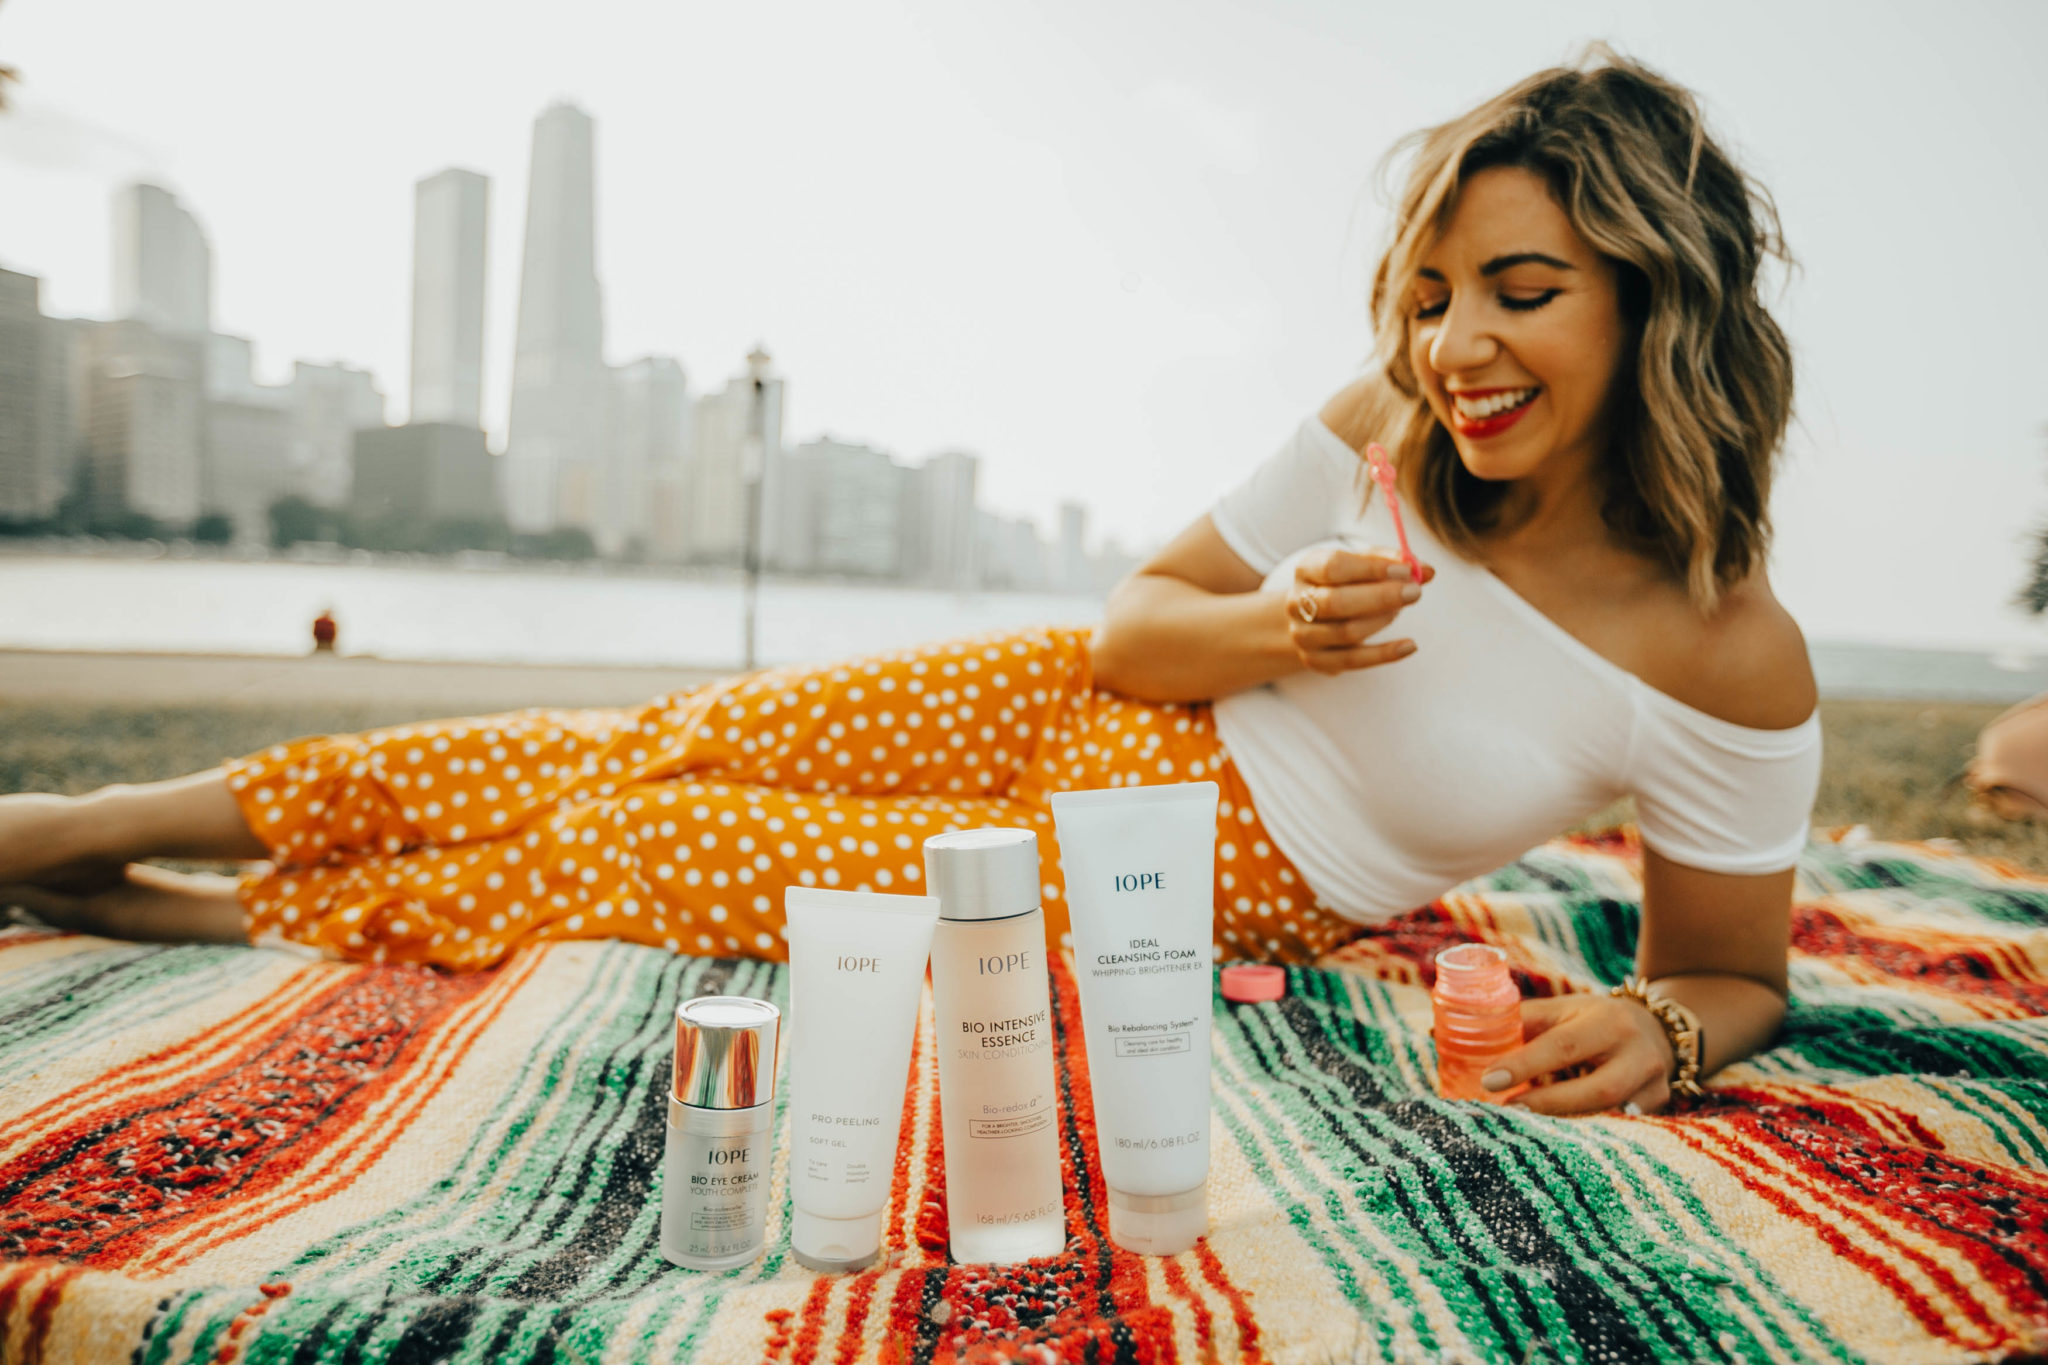 Korean Skincare Products | IOPE Skincare Giveaway featured by popular Chicago beauty blogger Glass of Glam